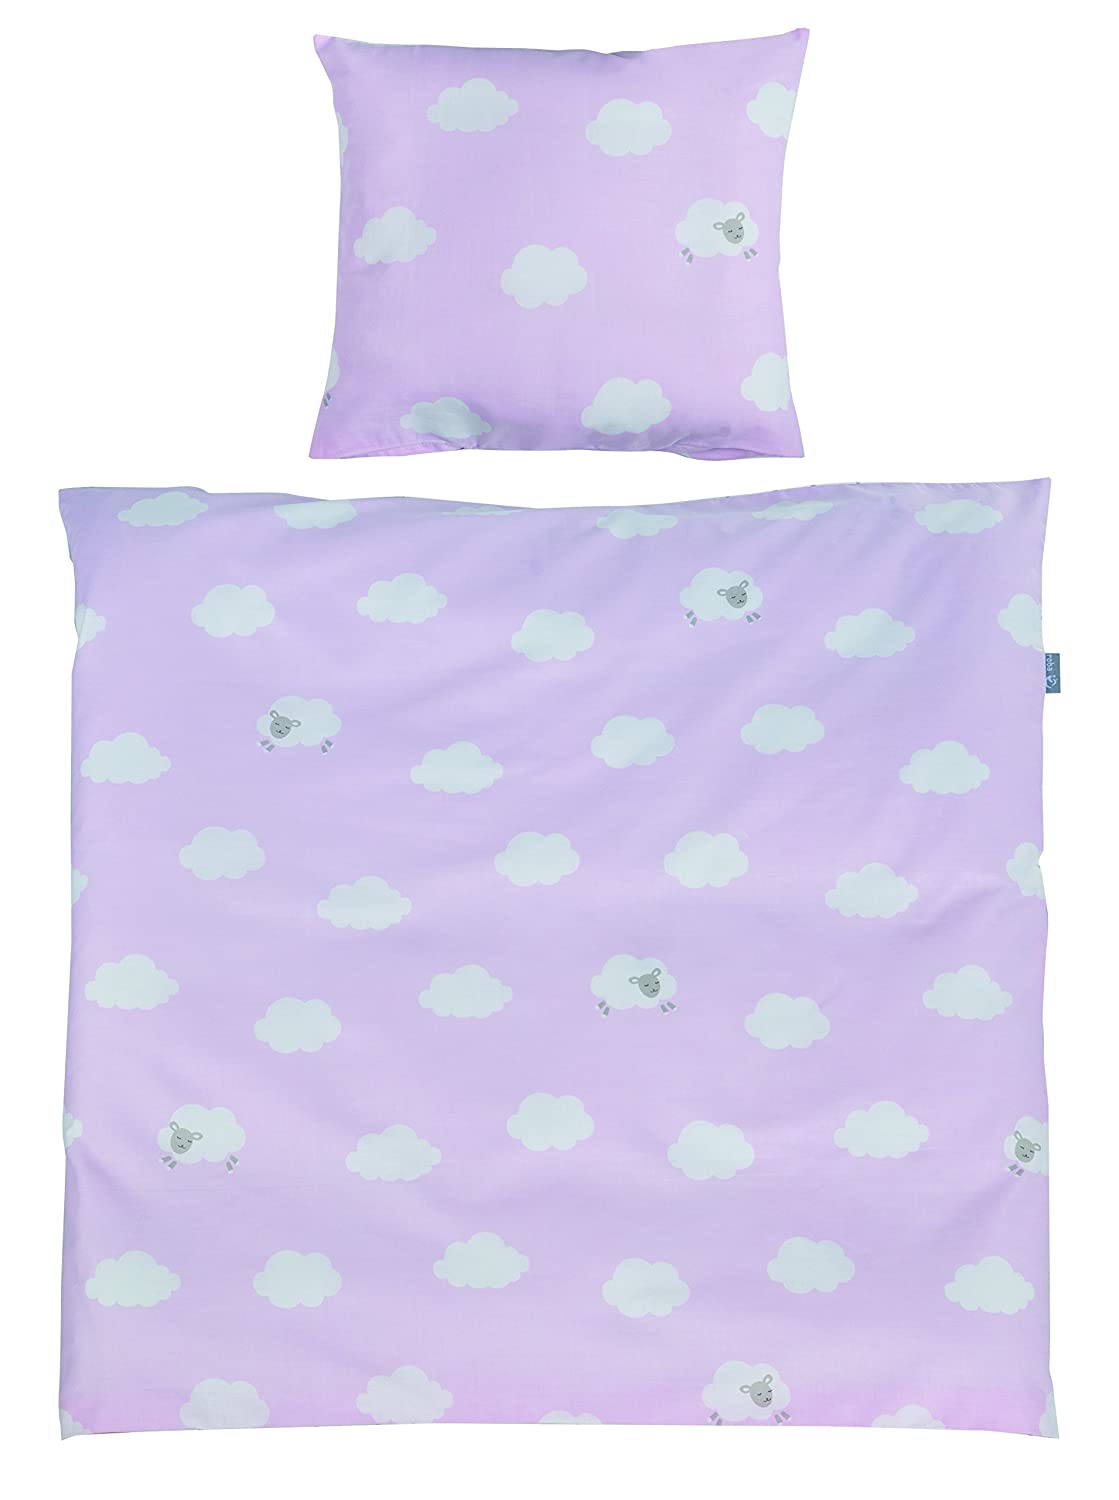 Roba 2-Piece Bedding Set collection Small cloud pink 80x80 cm